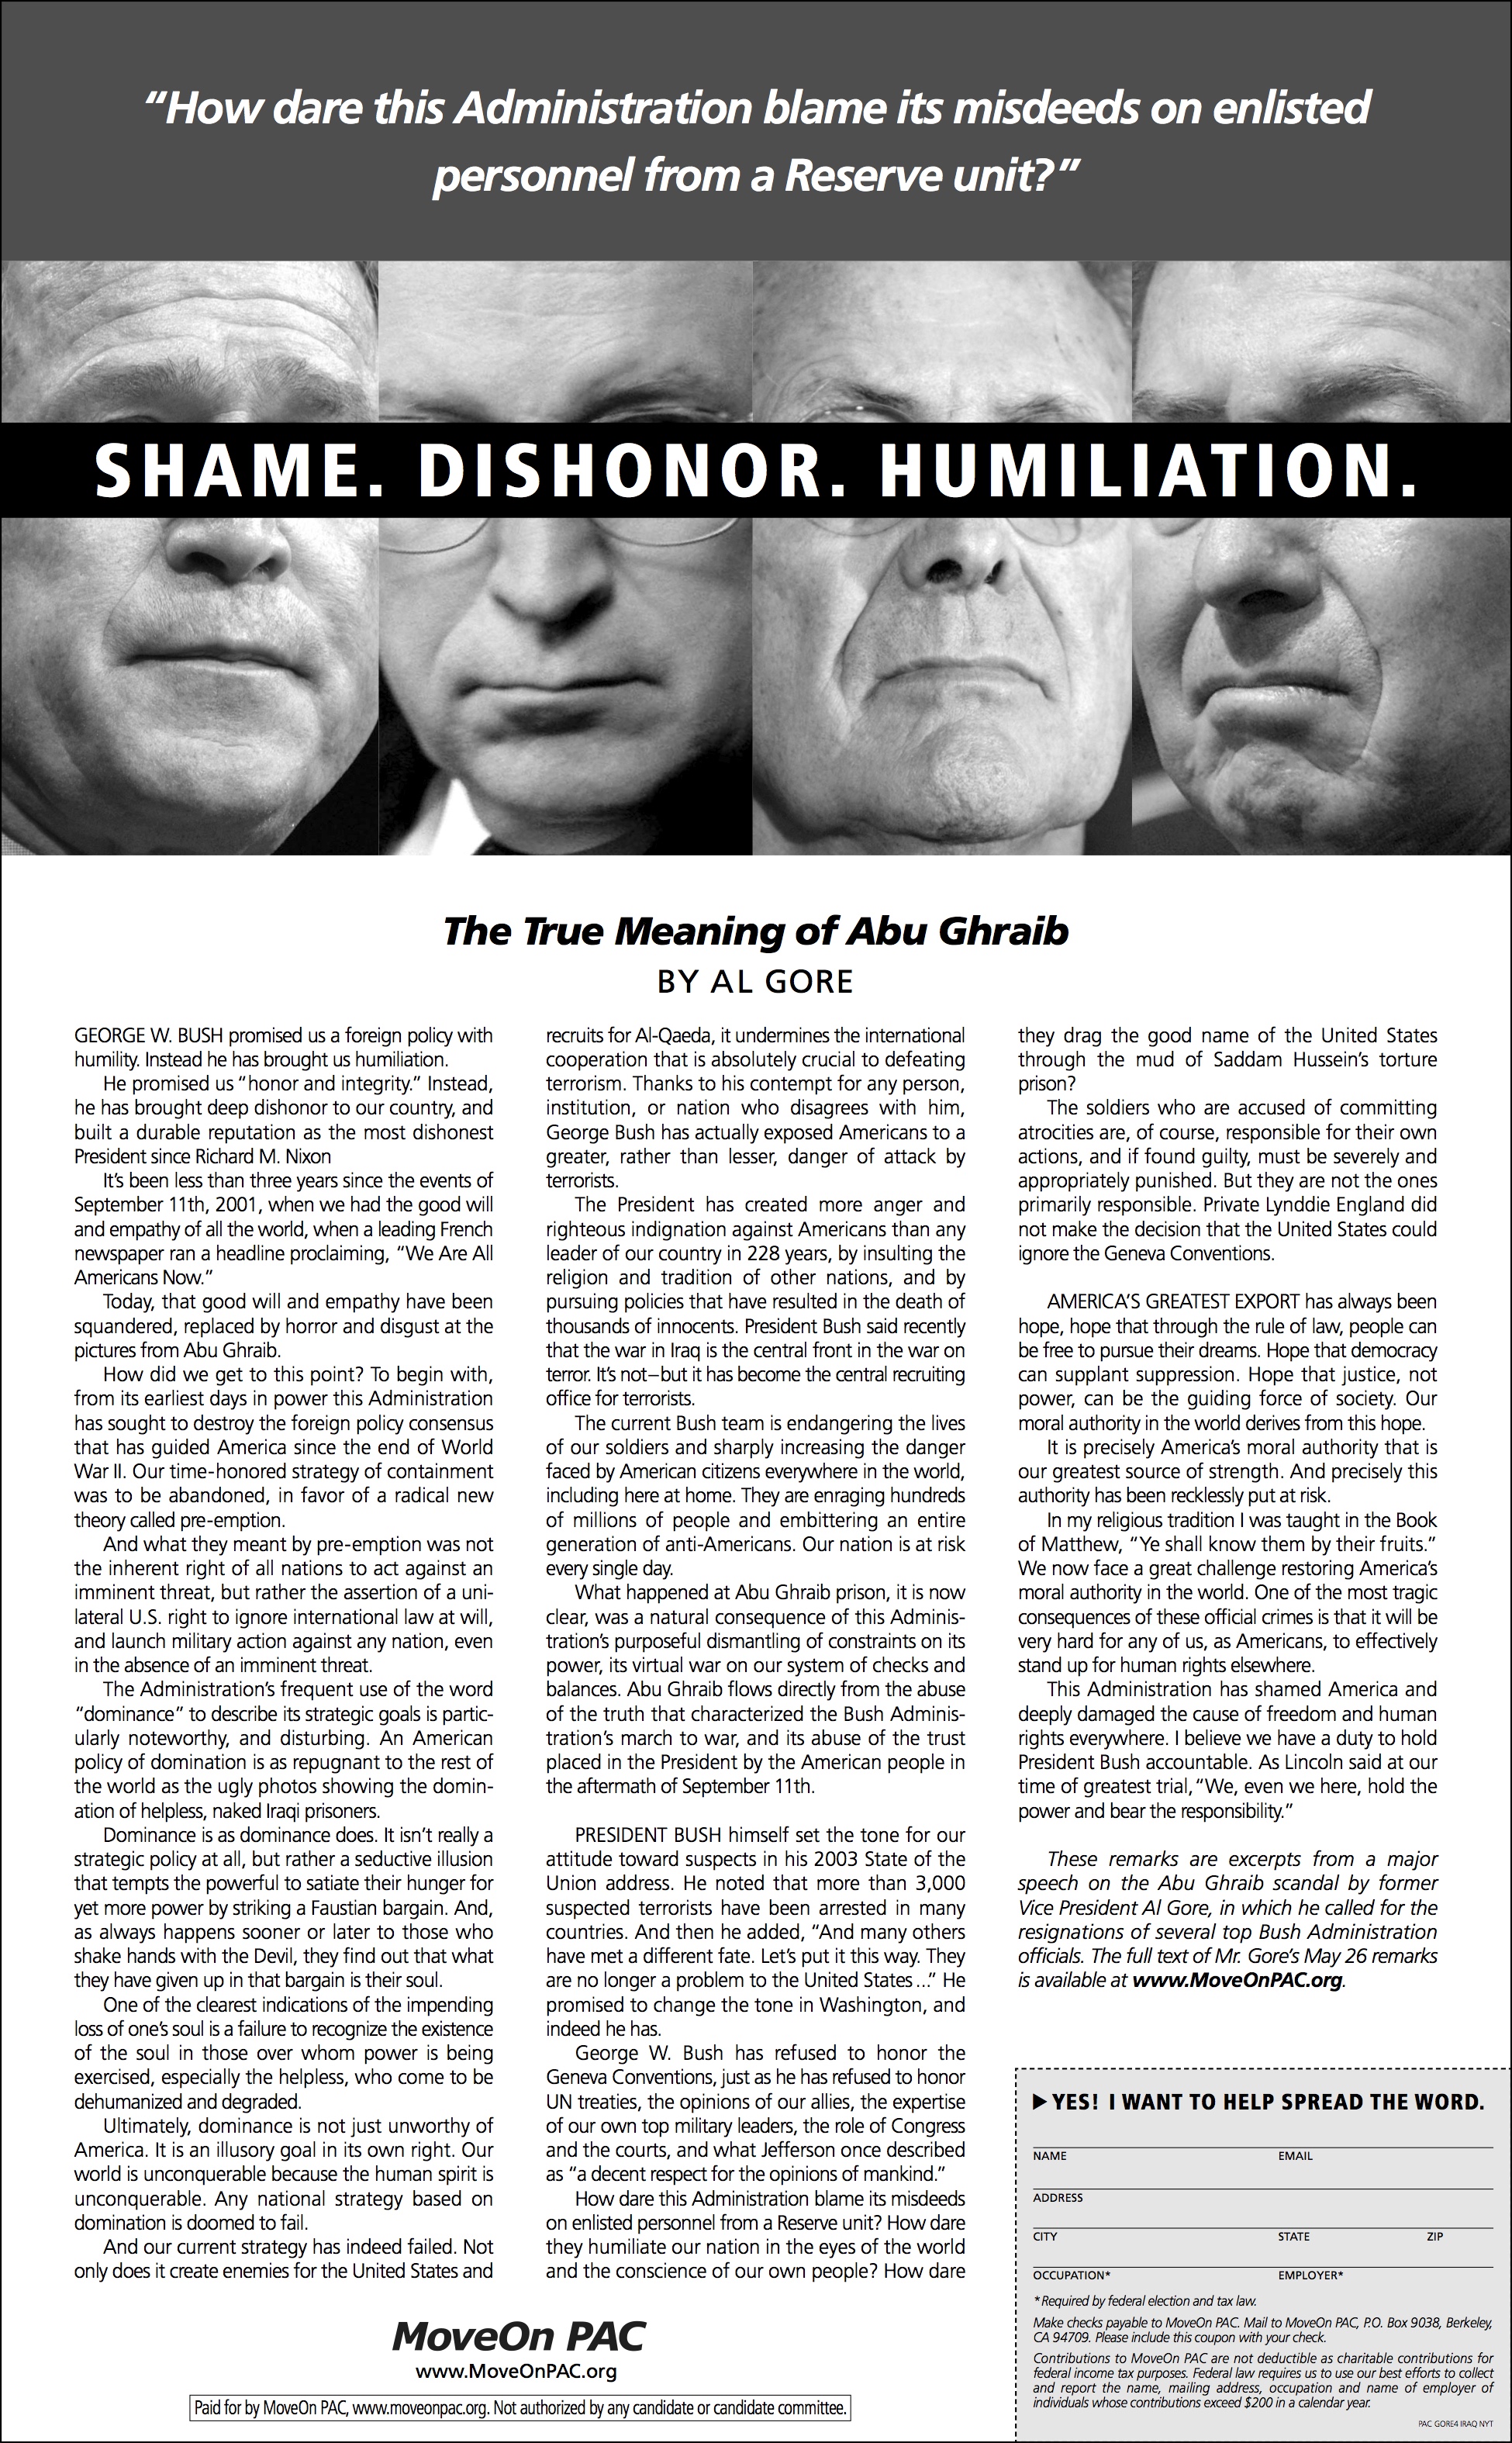   When Al Gore delivered a series of speeches across the country in 2004, Art worked with the former Vice President to edit each 10,000 word speech into a 1,000 word NY Times ad. Copyediting and creative direction by Art Silverman. Headline by Pacy M